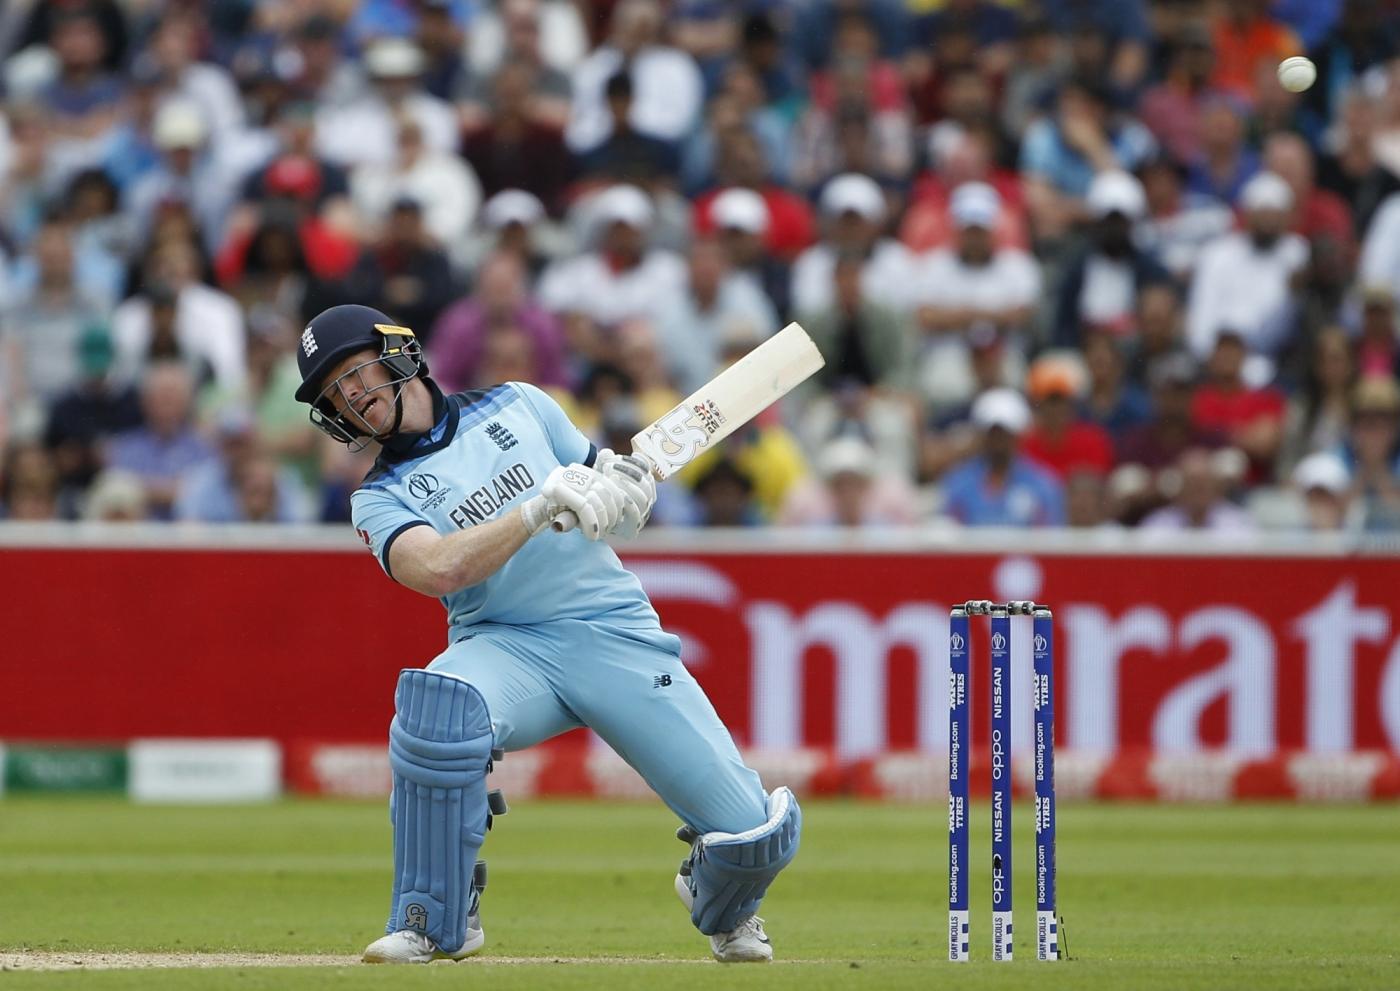 Birmingham: England's Eoin Morgan in action during the second semi-final match of the 2019 World Cup between England and Australia at the Edgbaston Cricket Stadium in Birmingham, England on July 11, 2019. (Photo: Surjeet Kumar/IANS) by . 